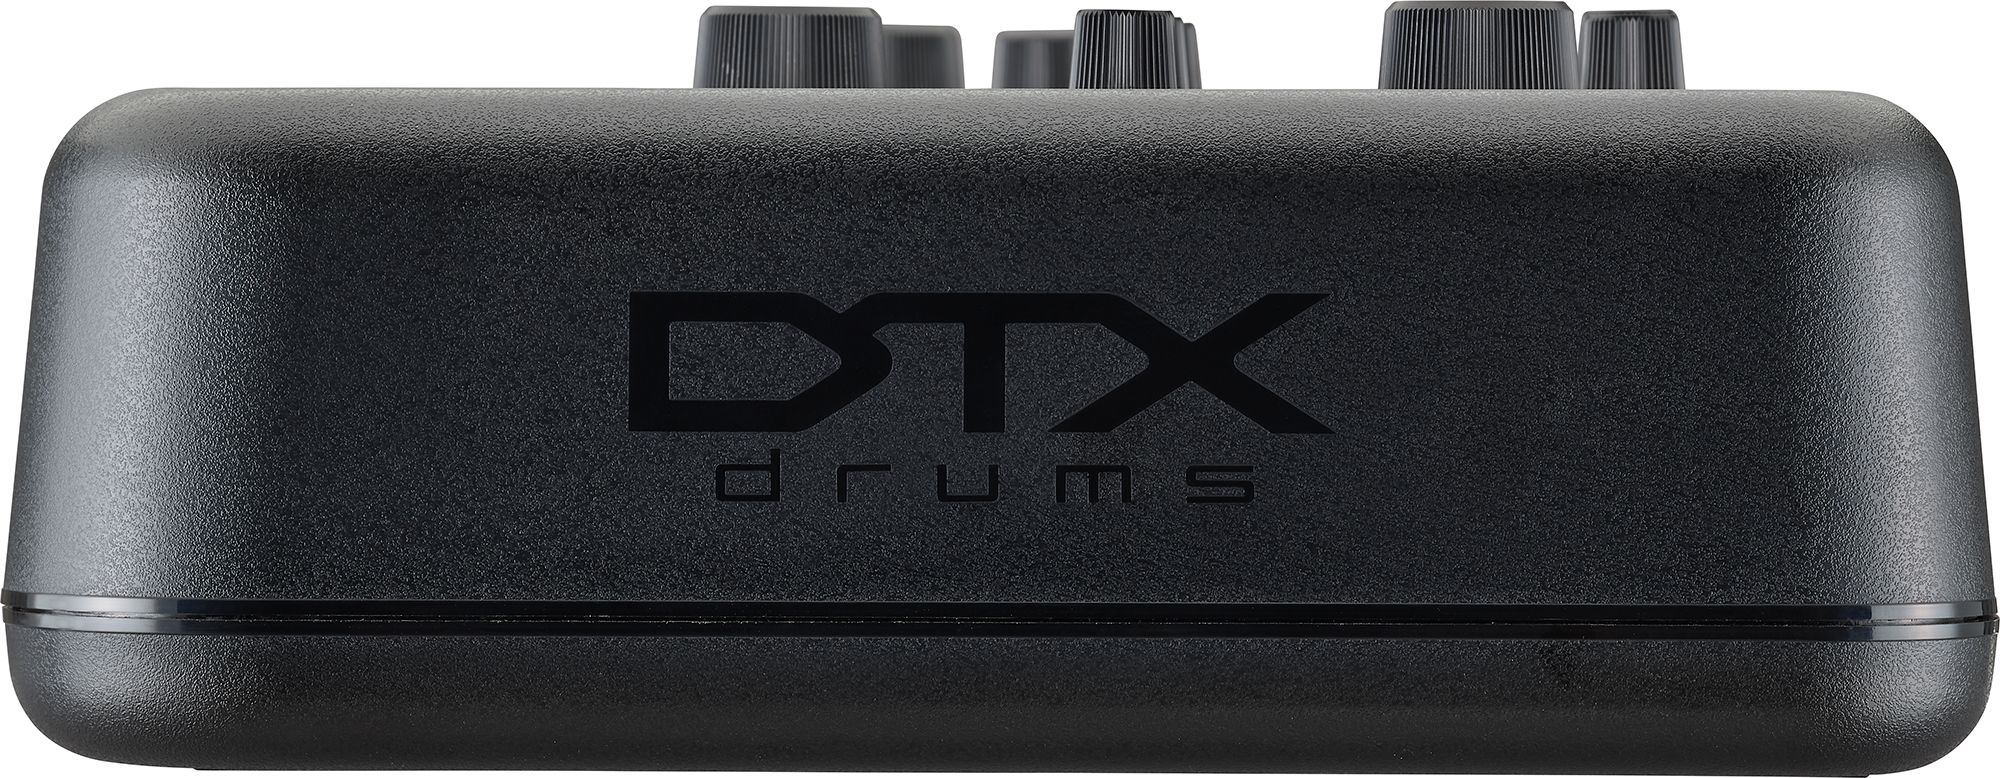 DTX-PROX - Products - Electronic Drum Trigger Modules - Electronic 